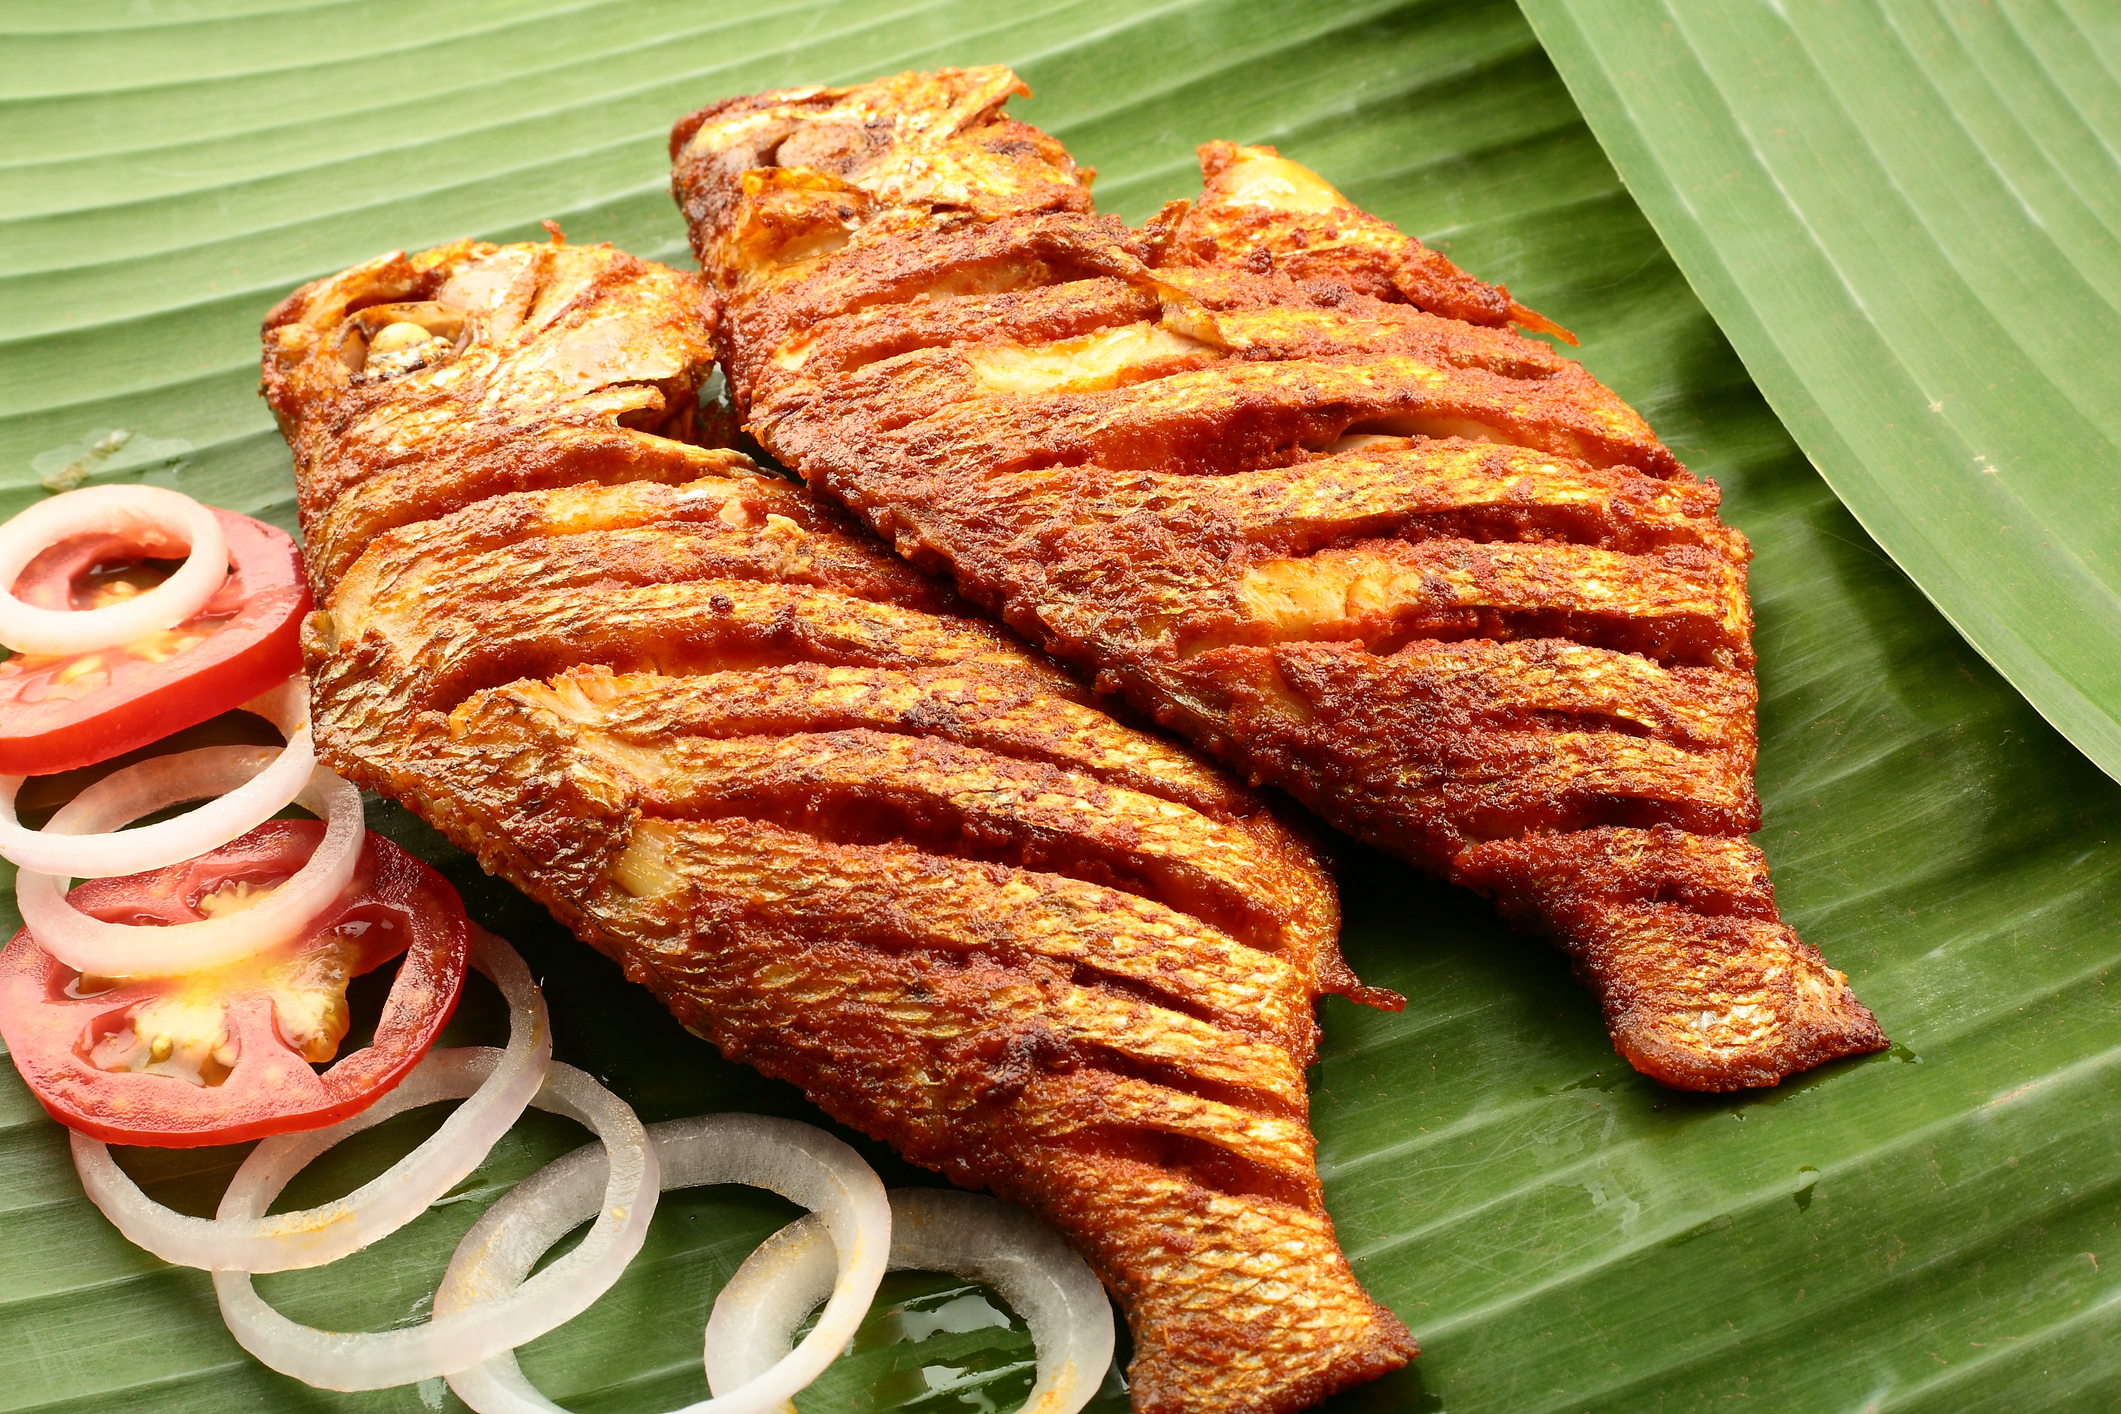 spicy seafood fish fry served on banana leaf - Raw Fish In Pregnancy